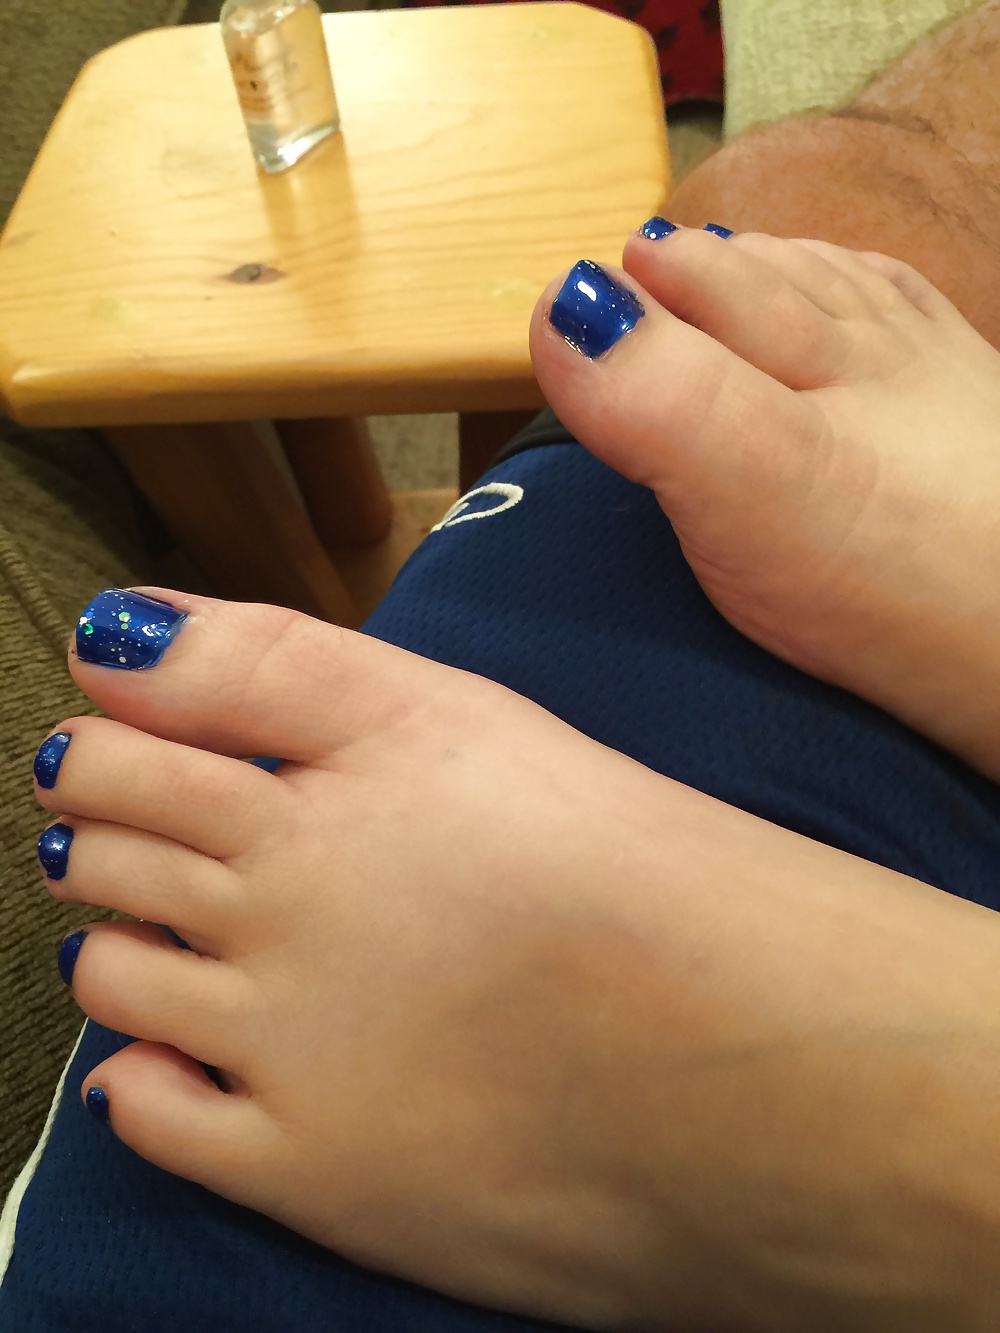 Blue Toes Porn - See and Save As fresh painted blue toes porn pict - 4crot.com